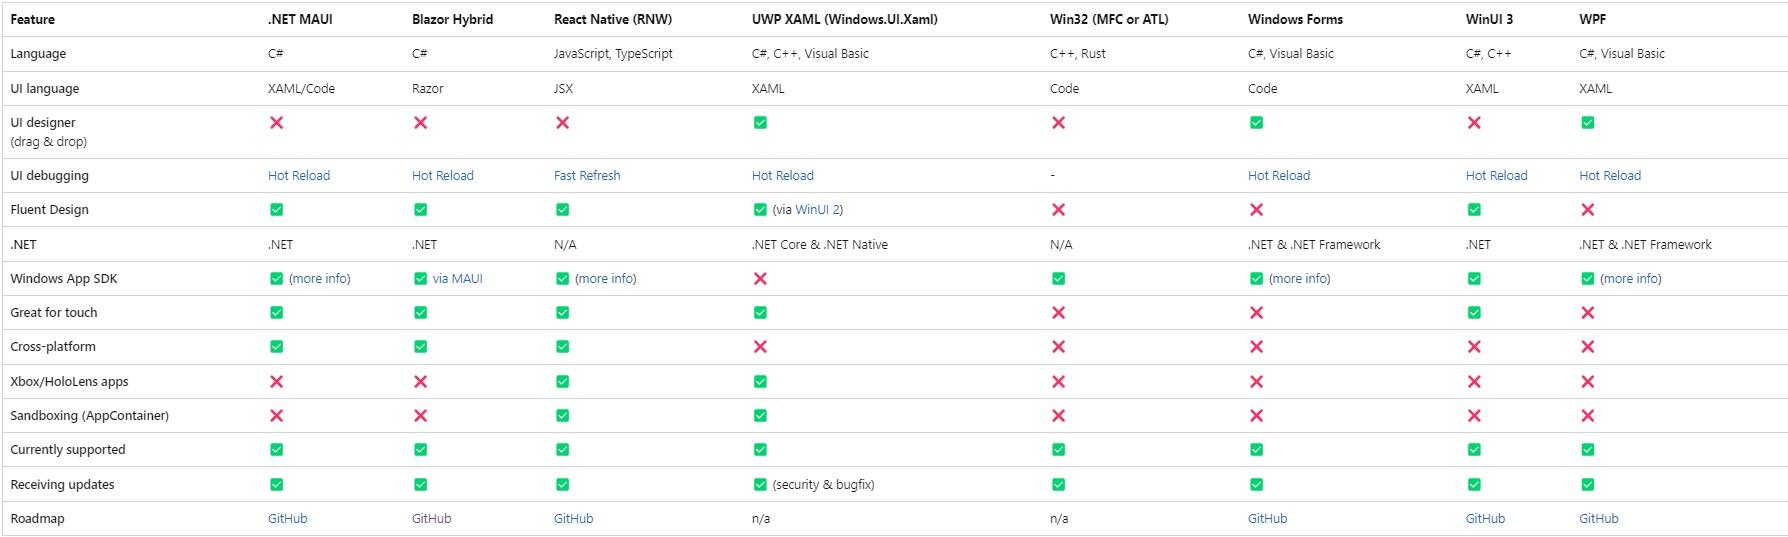 A comparison chart outlining the features of eight different UI frameworks supported by Microsoft for Windows development, including .NET MAUI, Blazor Hybrid, React Native, UWP XAML, Win32, Windows Forms, WinUI 3, and WPF.